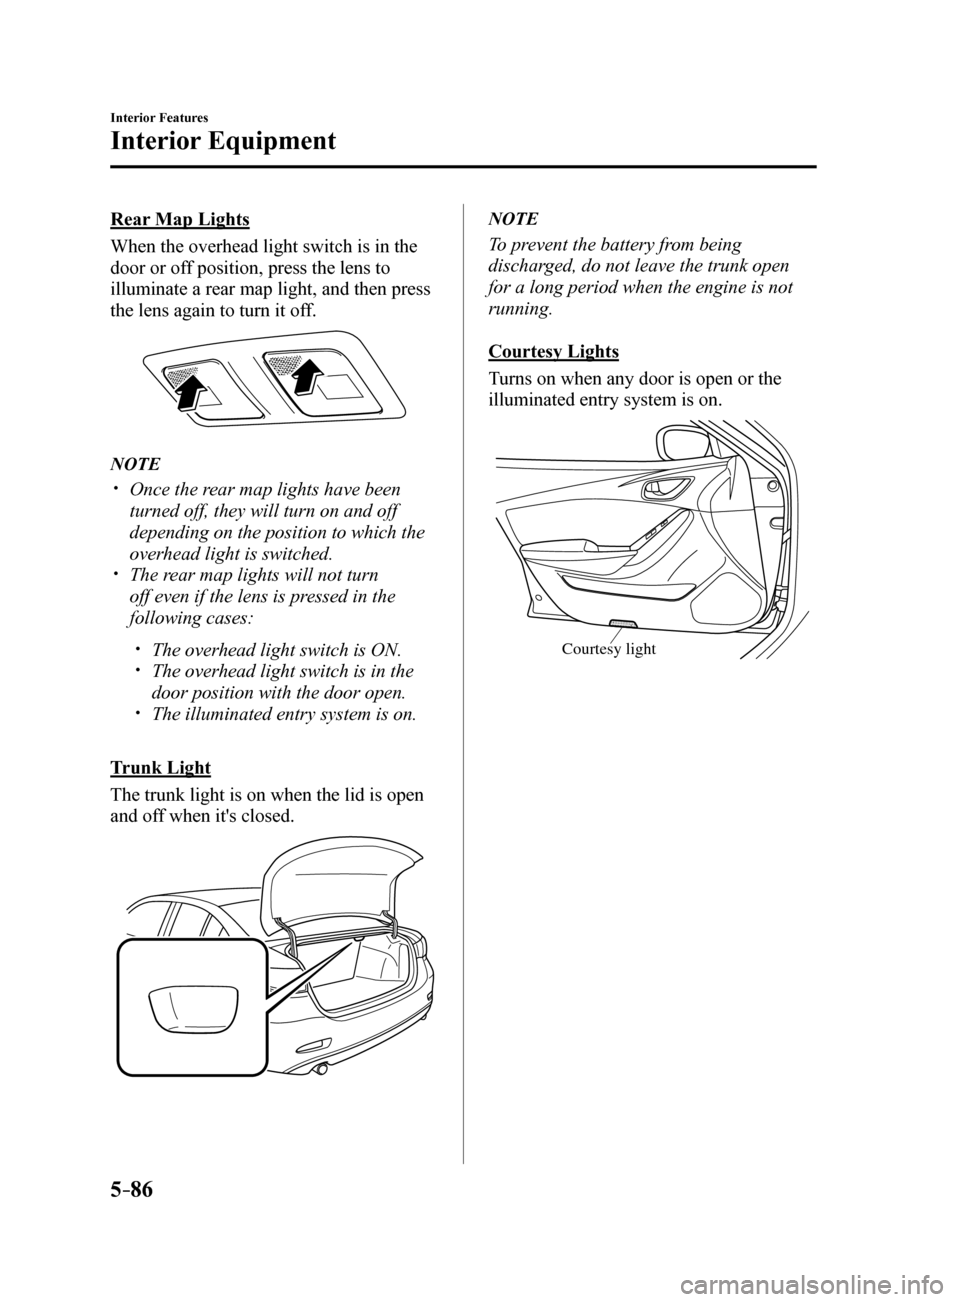 MAZDA MODEL 6 2017  Owners Manual (in English) 5–86
Interior Features
Interior Equipment
Rear Map Lights
When the overhead light switch is in the 
door or off position, press the lens to 
illuminate a rear map light, and then press 
the lens aga